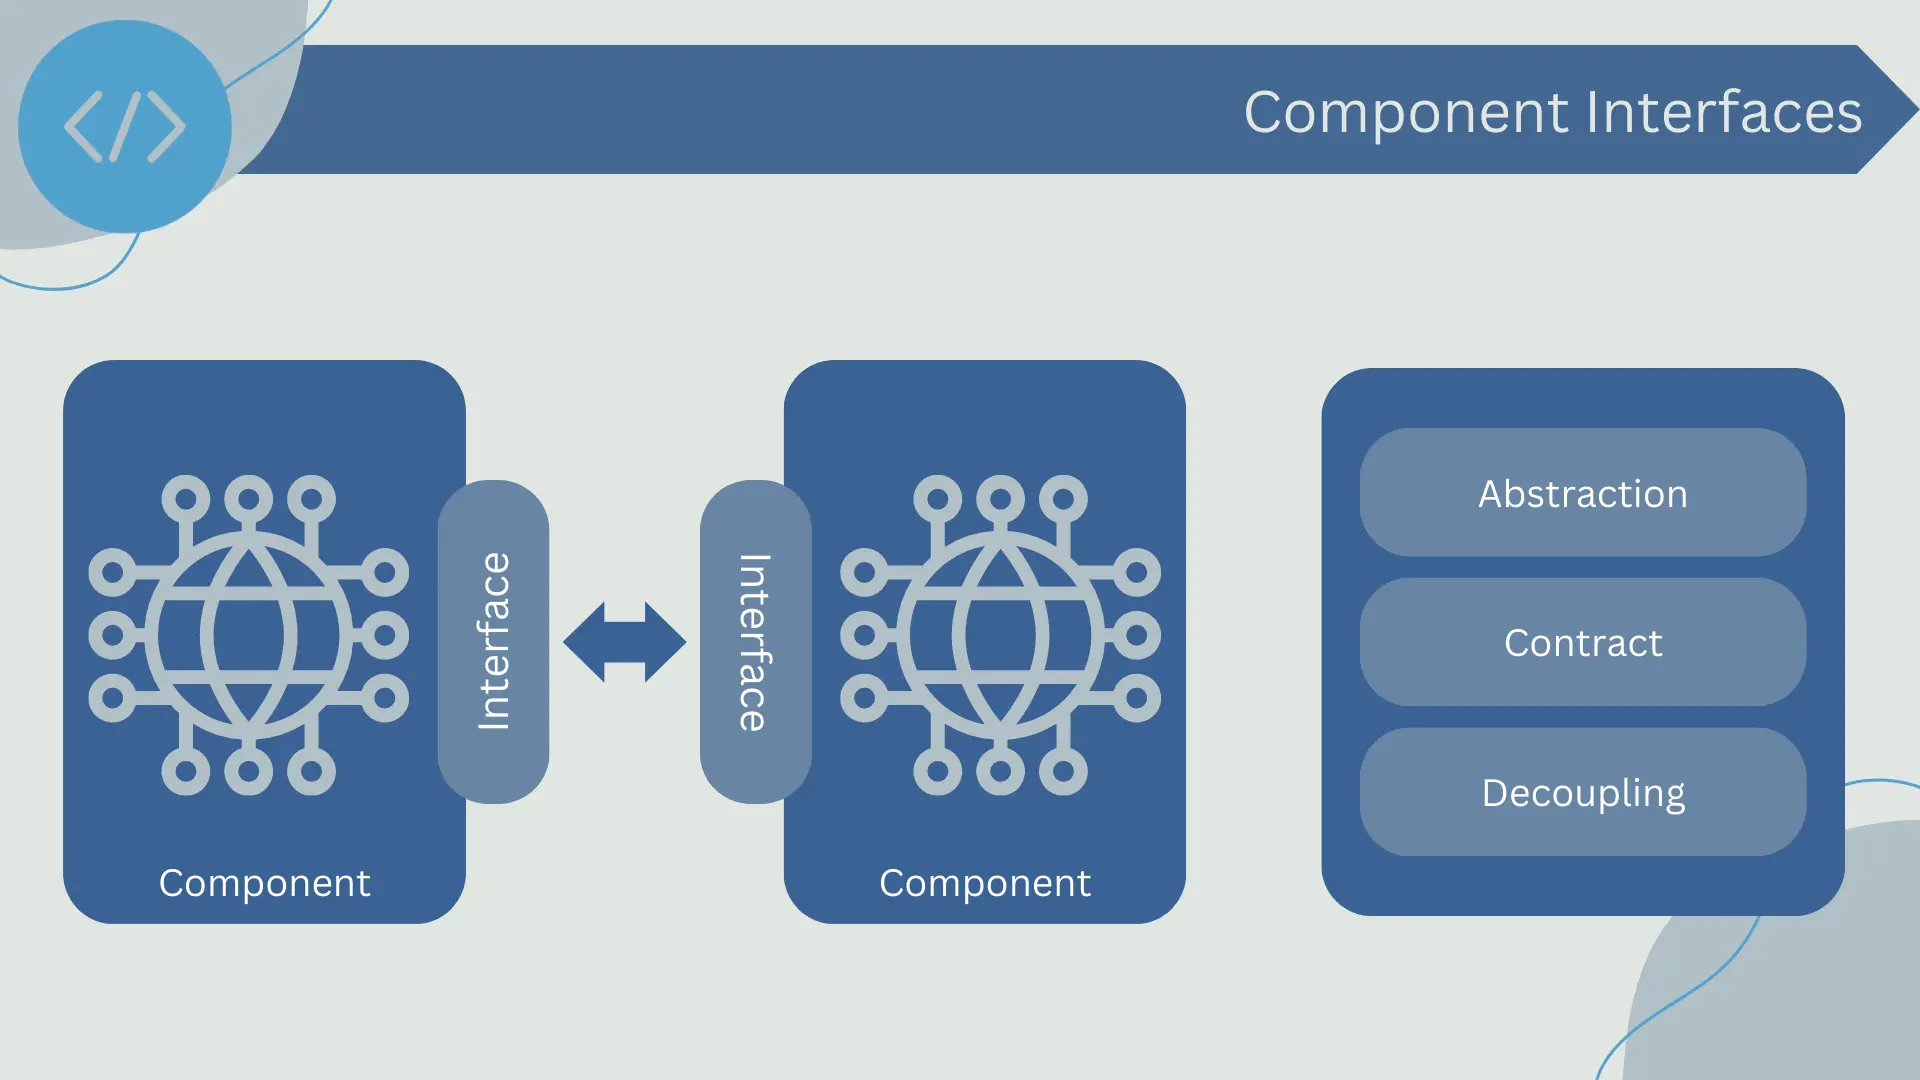 Component interfaces